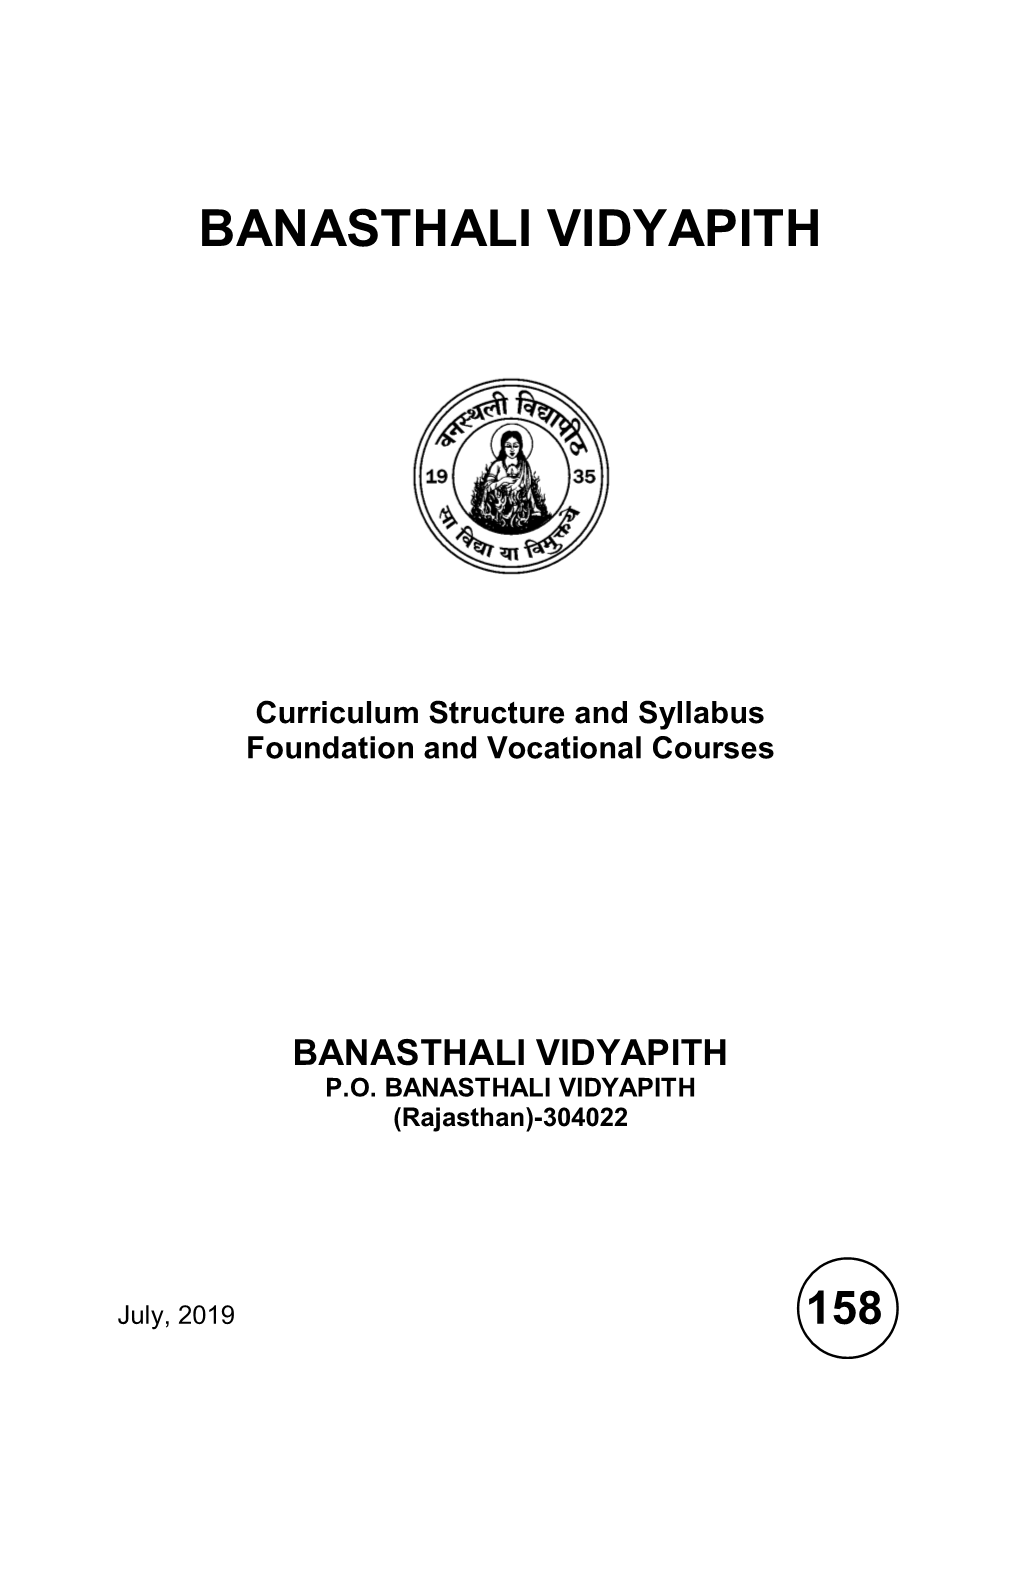 Foundation,Vocational and Other Courses